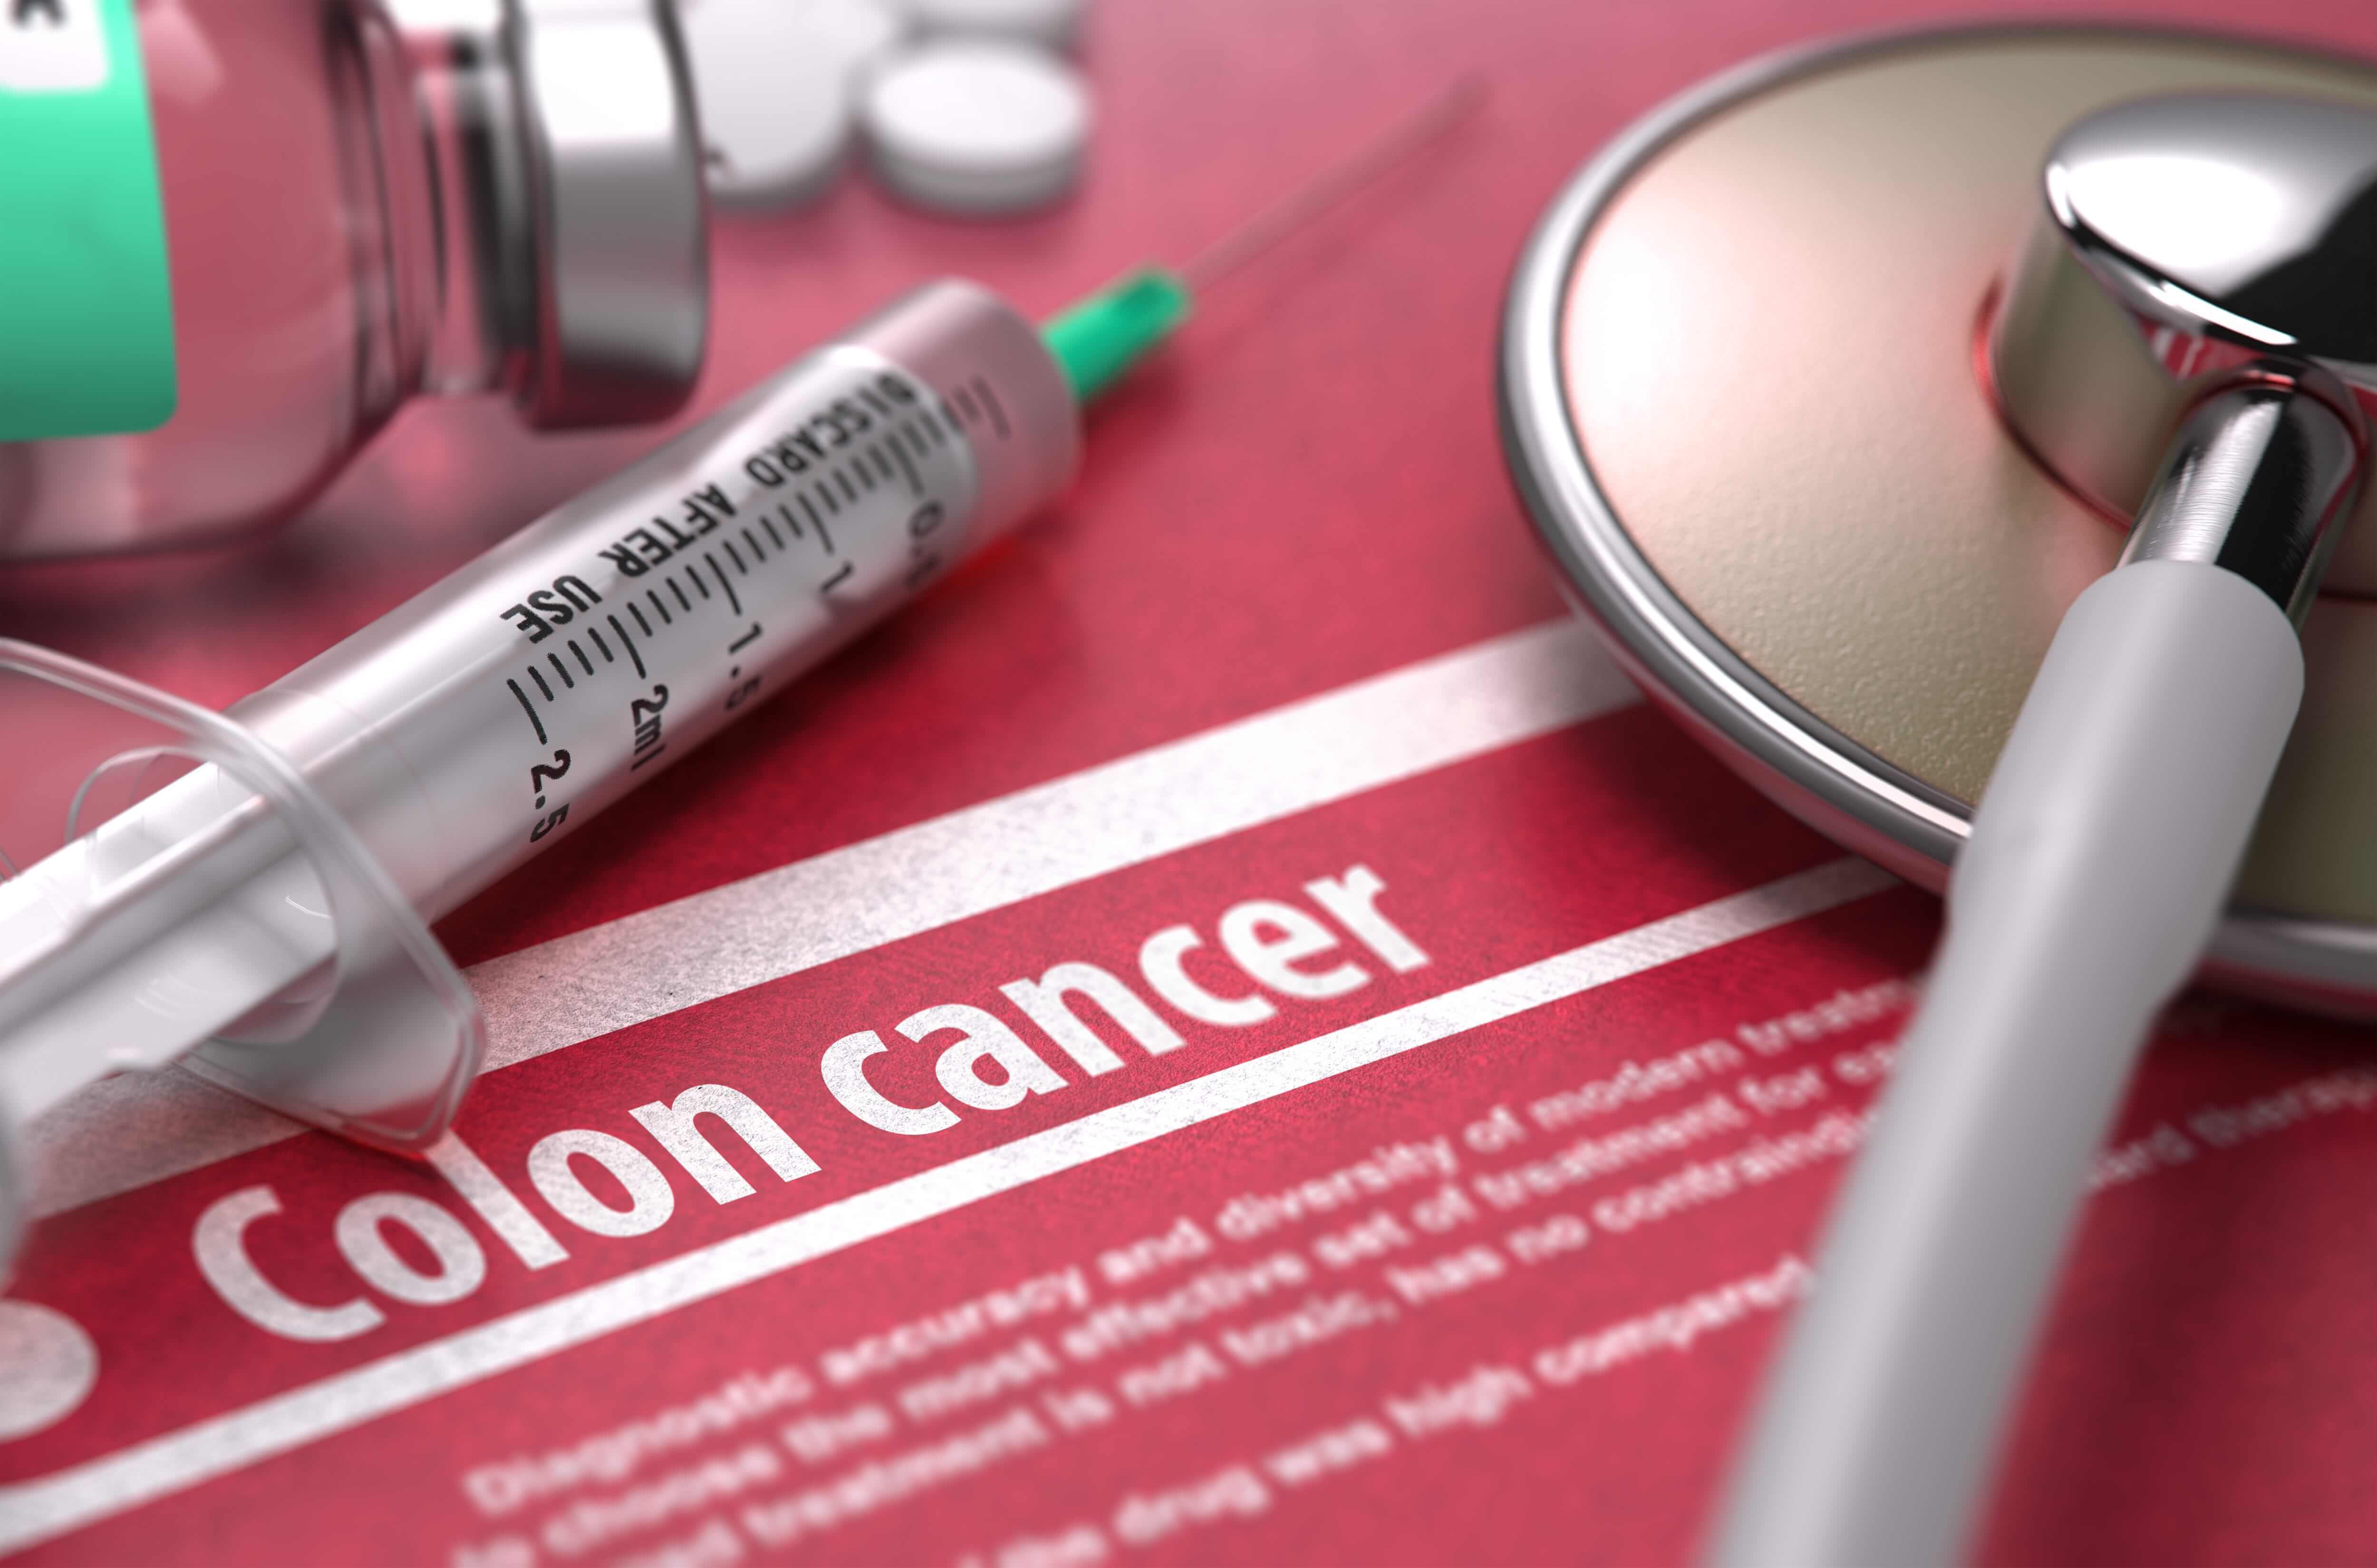 Chemotherapy for colorectal cancer